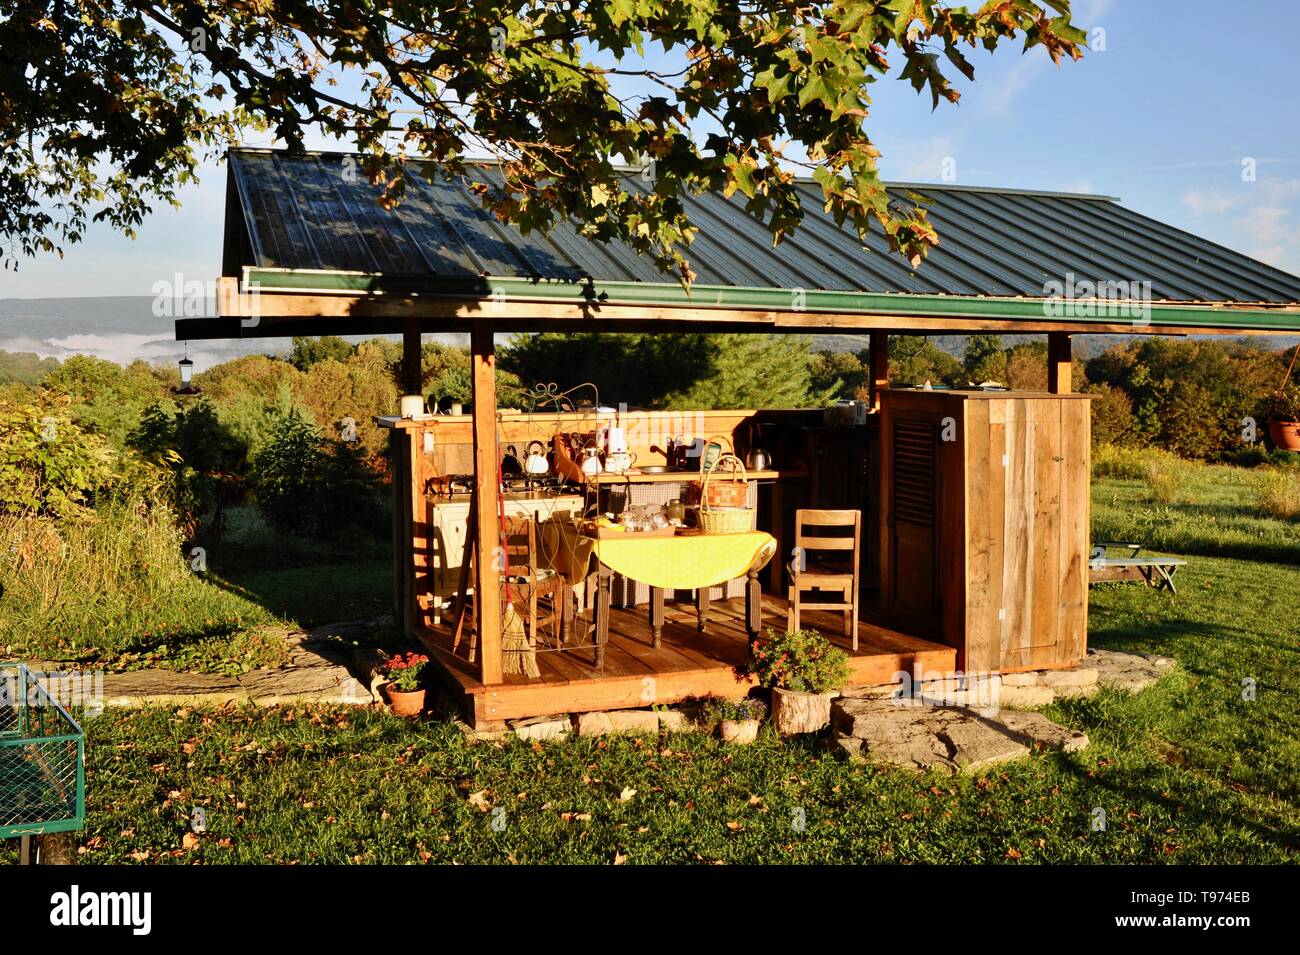 Outdoor kitchen facilities, stove, table, pans and pots, for 'glamping' (glamorous camping) experience at Campbell Farm, Fort Hill, Pennsylvania USA Stock Photo